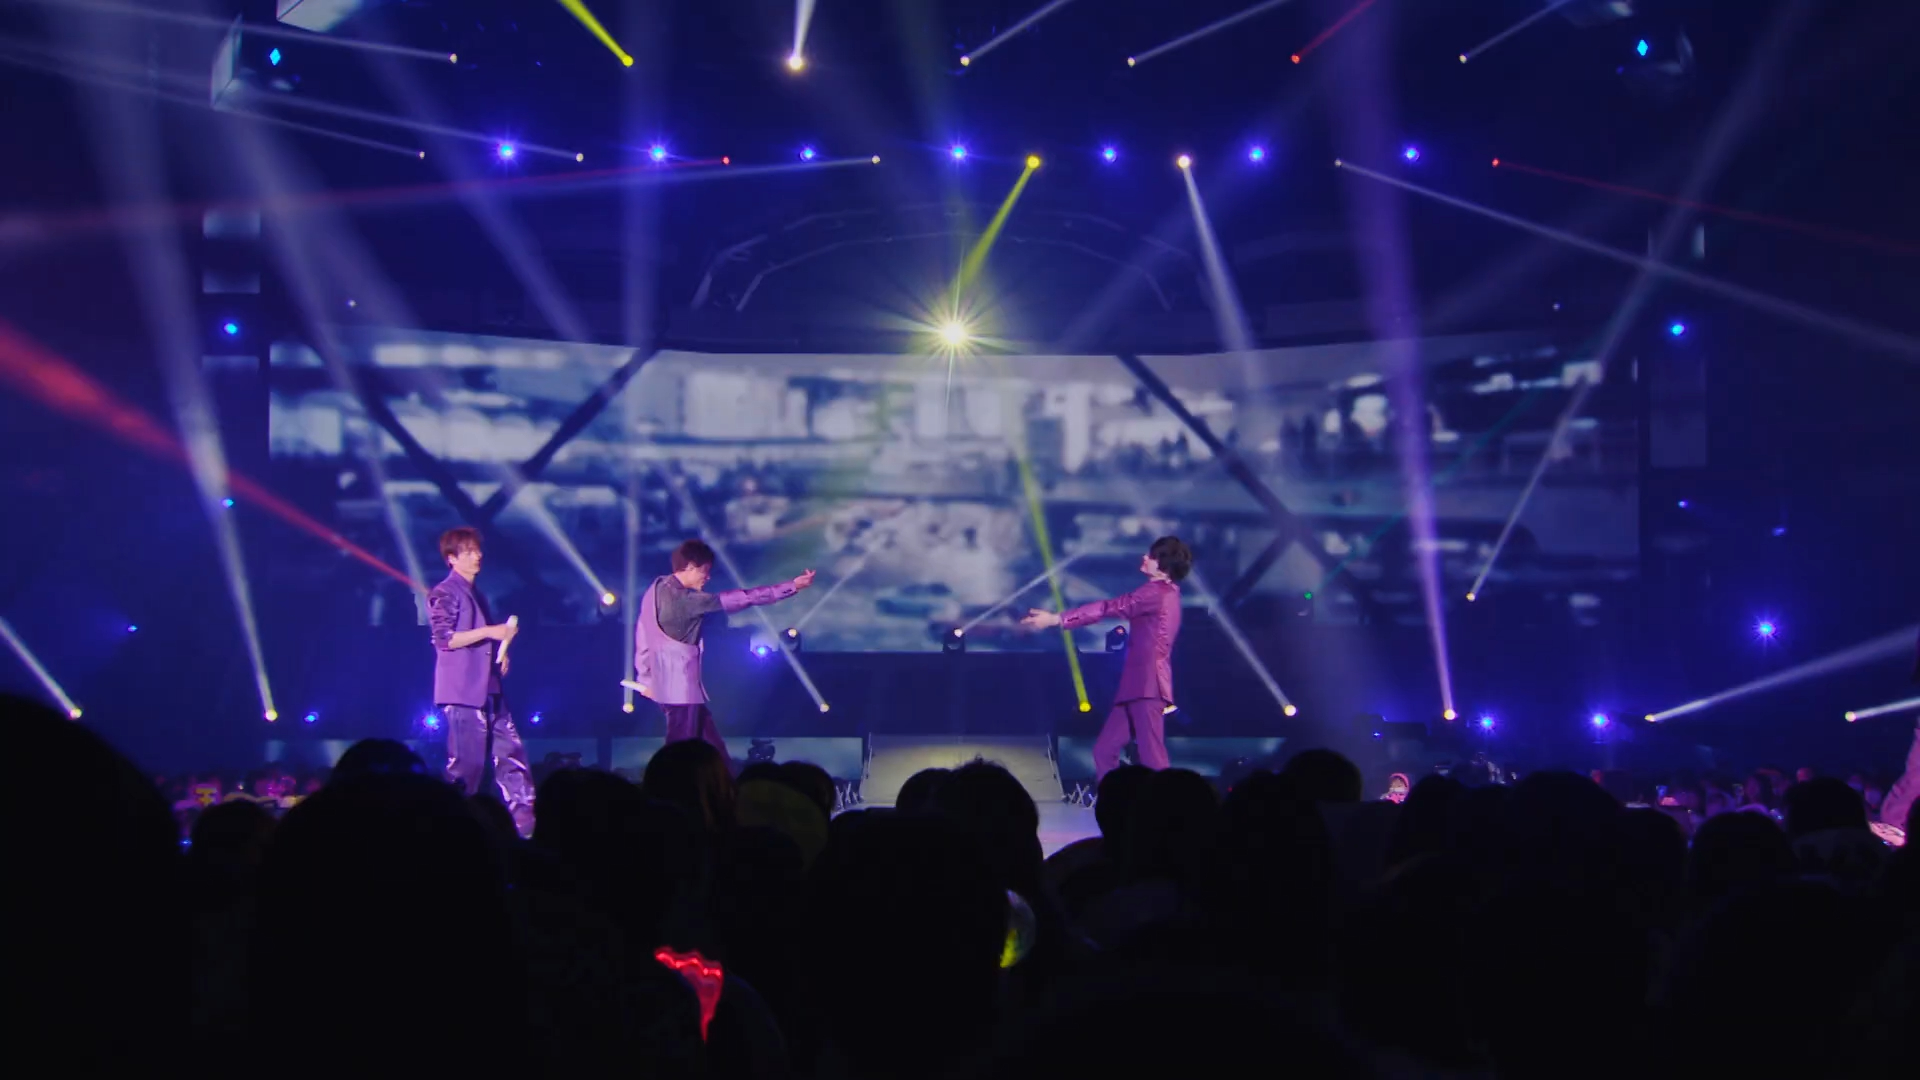 【Kis-My-Ft2】「Tokyo-Kis」Live Performance – from “Kis-My-Ft2 -For dear life-”